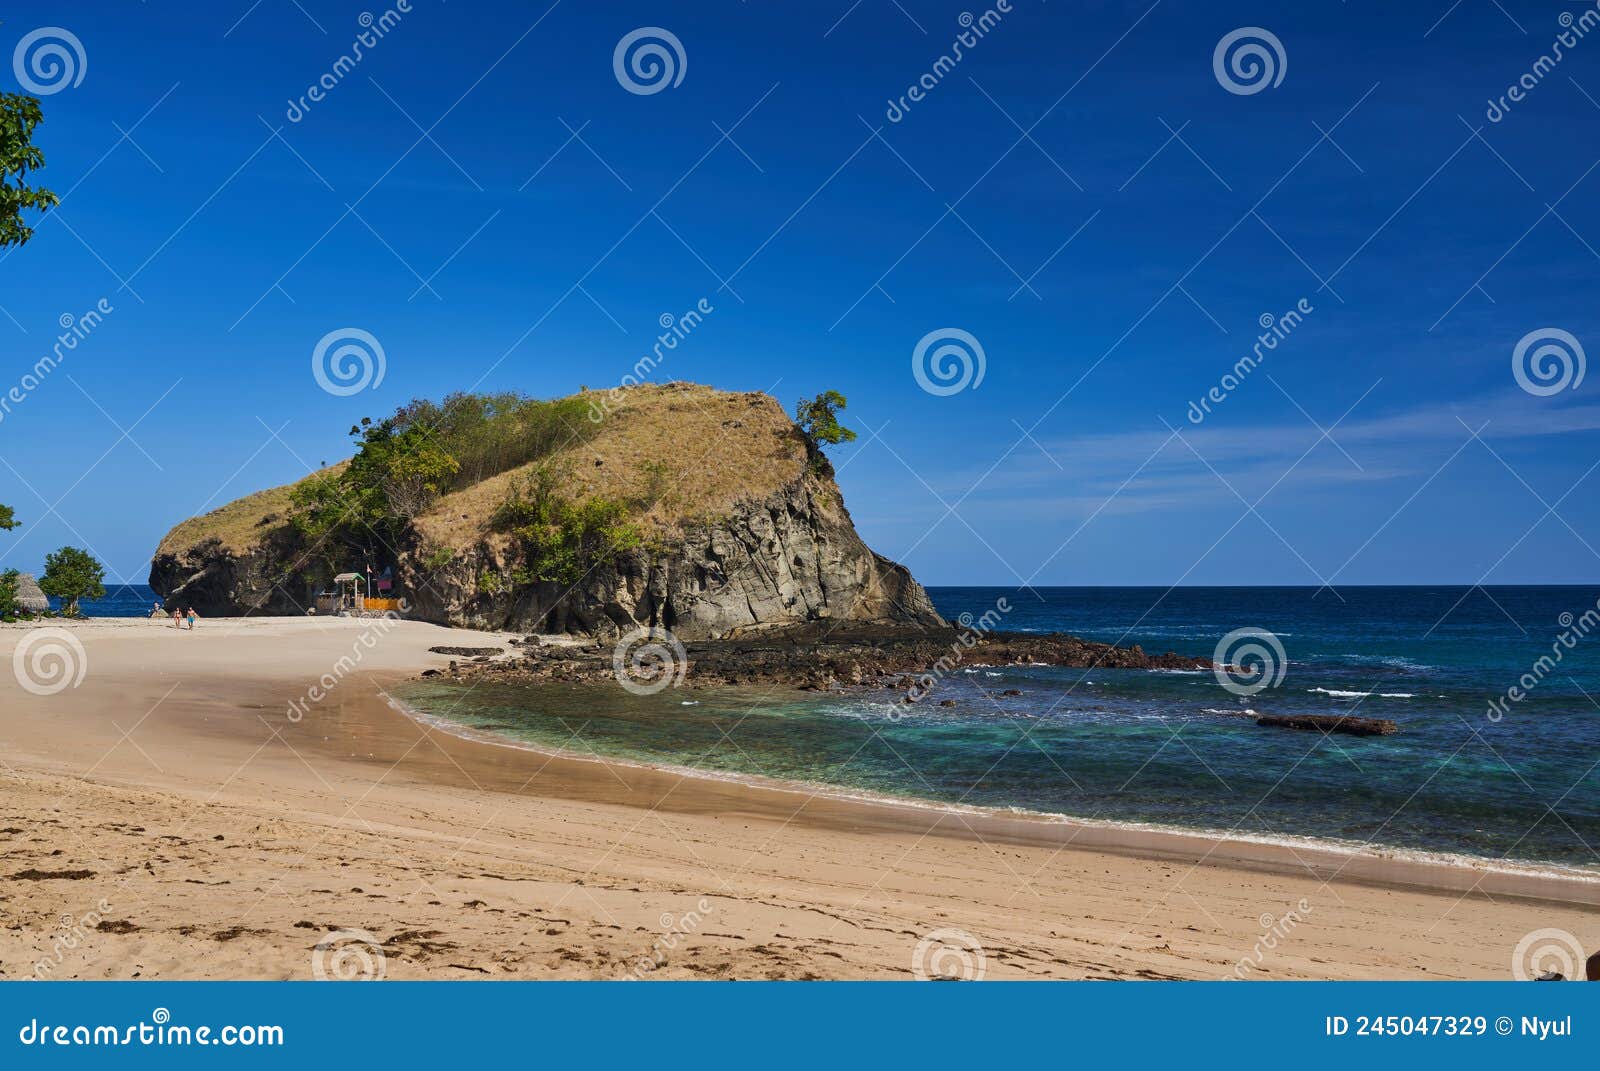 sandy beach for dream vacation in asia